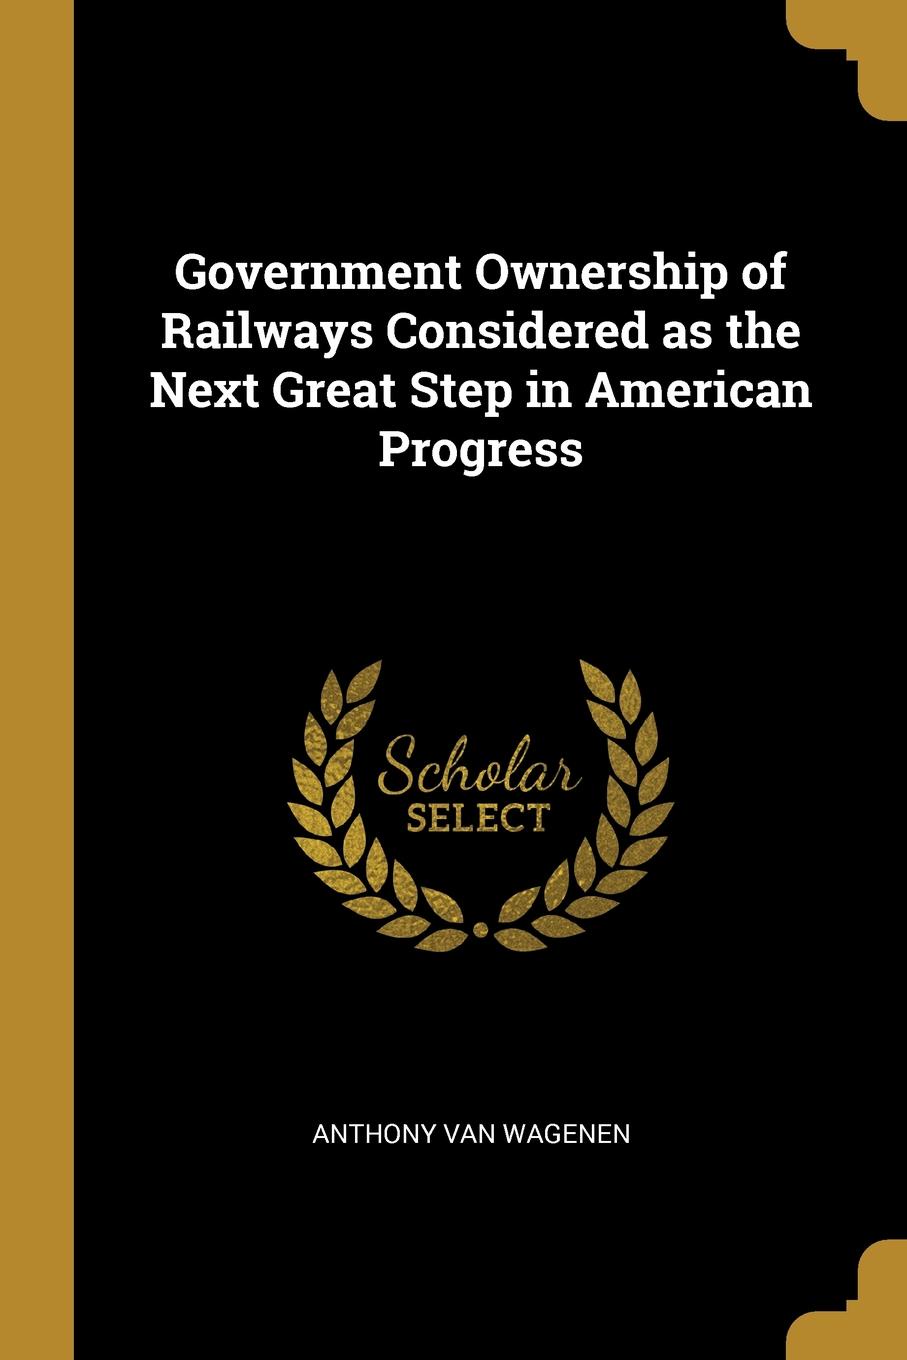 Government Ownership of Railways Considered as the Next Great Step in American Progress